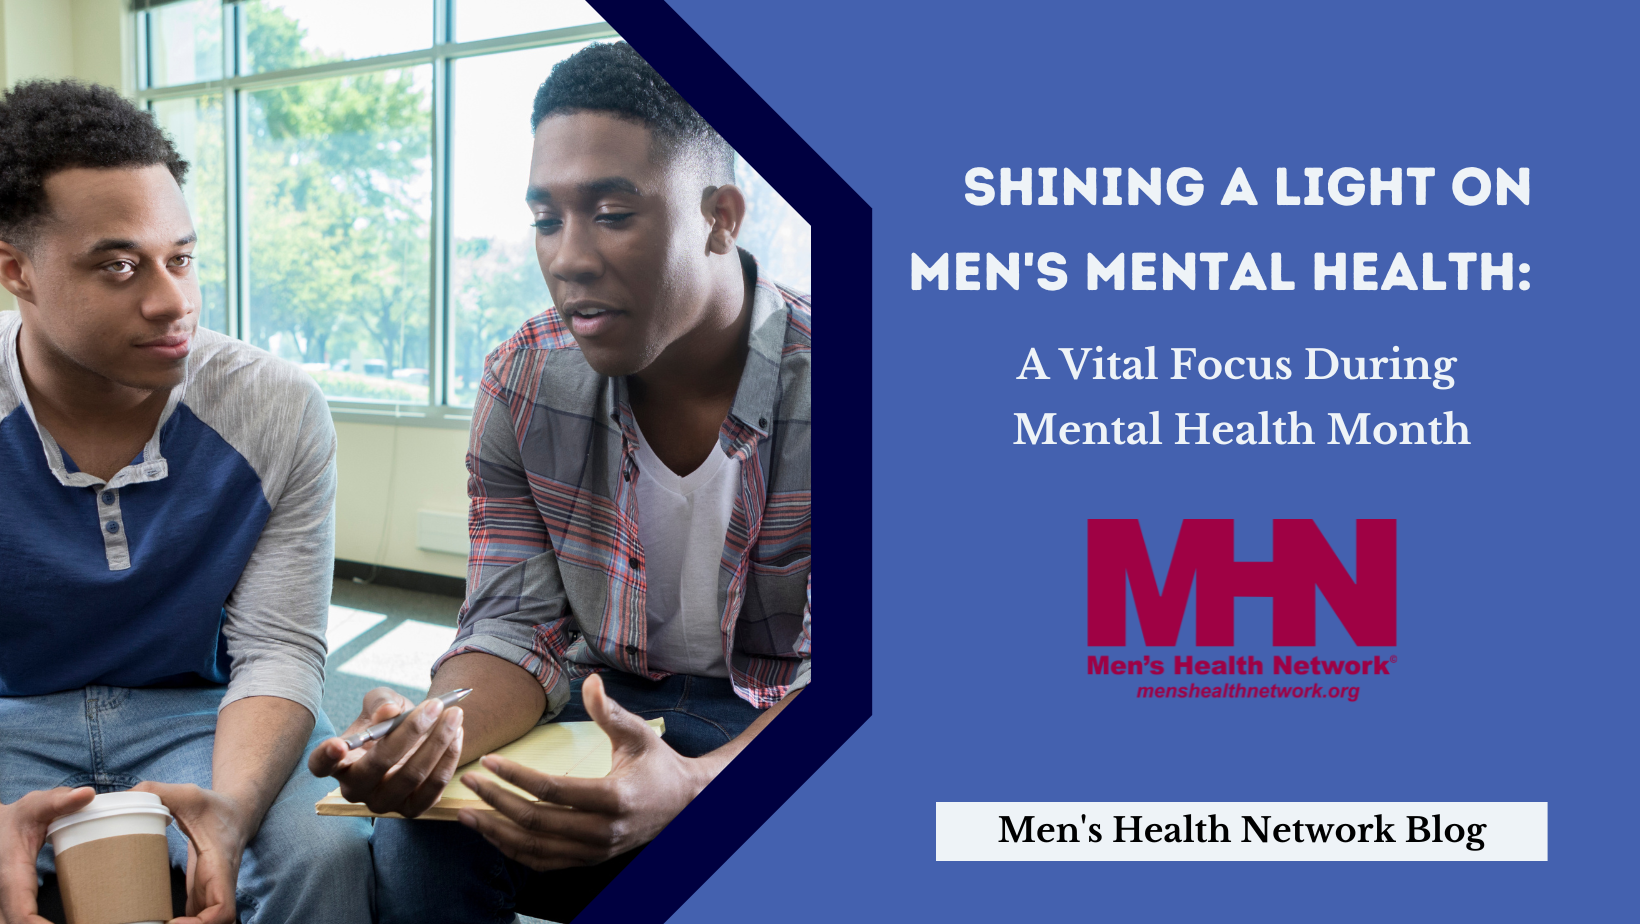 A Vital Focus During Mental Health Month – Talking About Men’s Health™